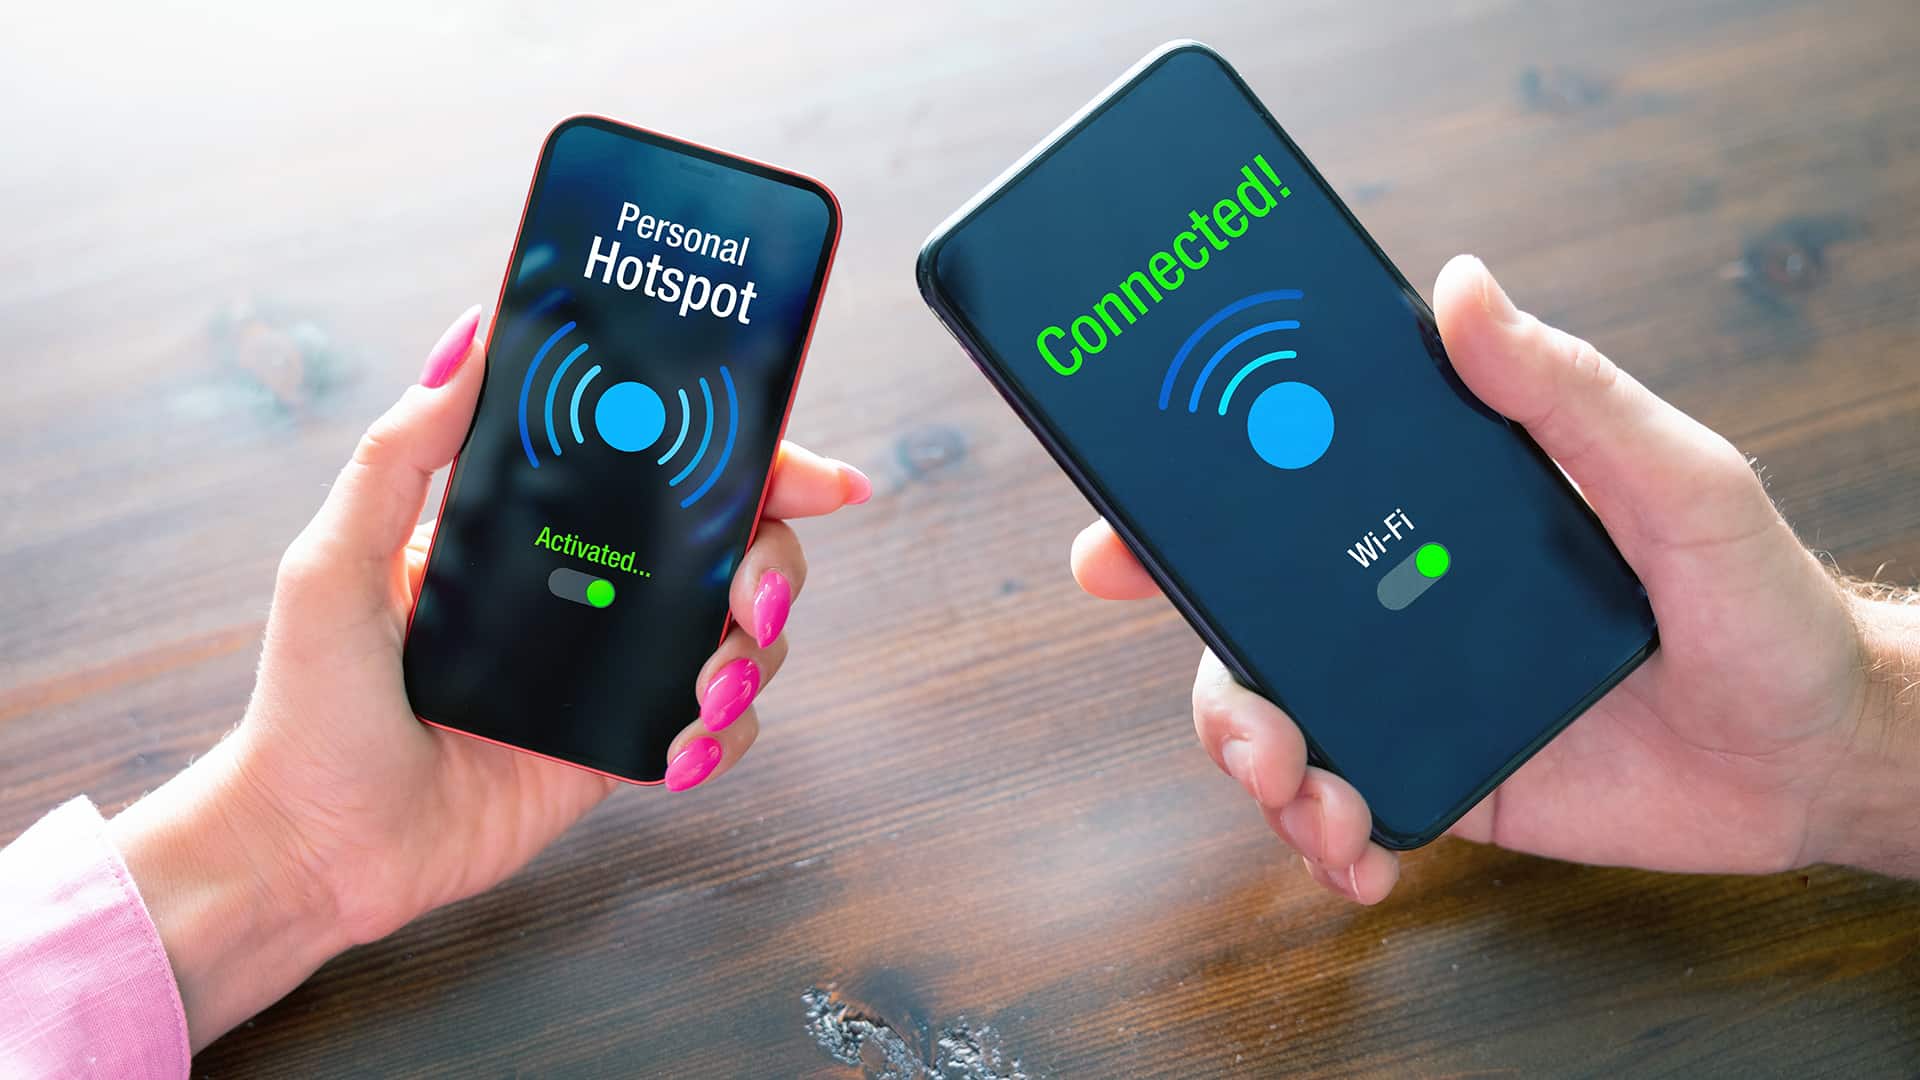 Two people hold phones, one as a hotspot and one connected to the hotspot